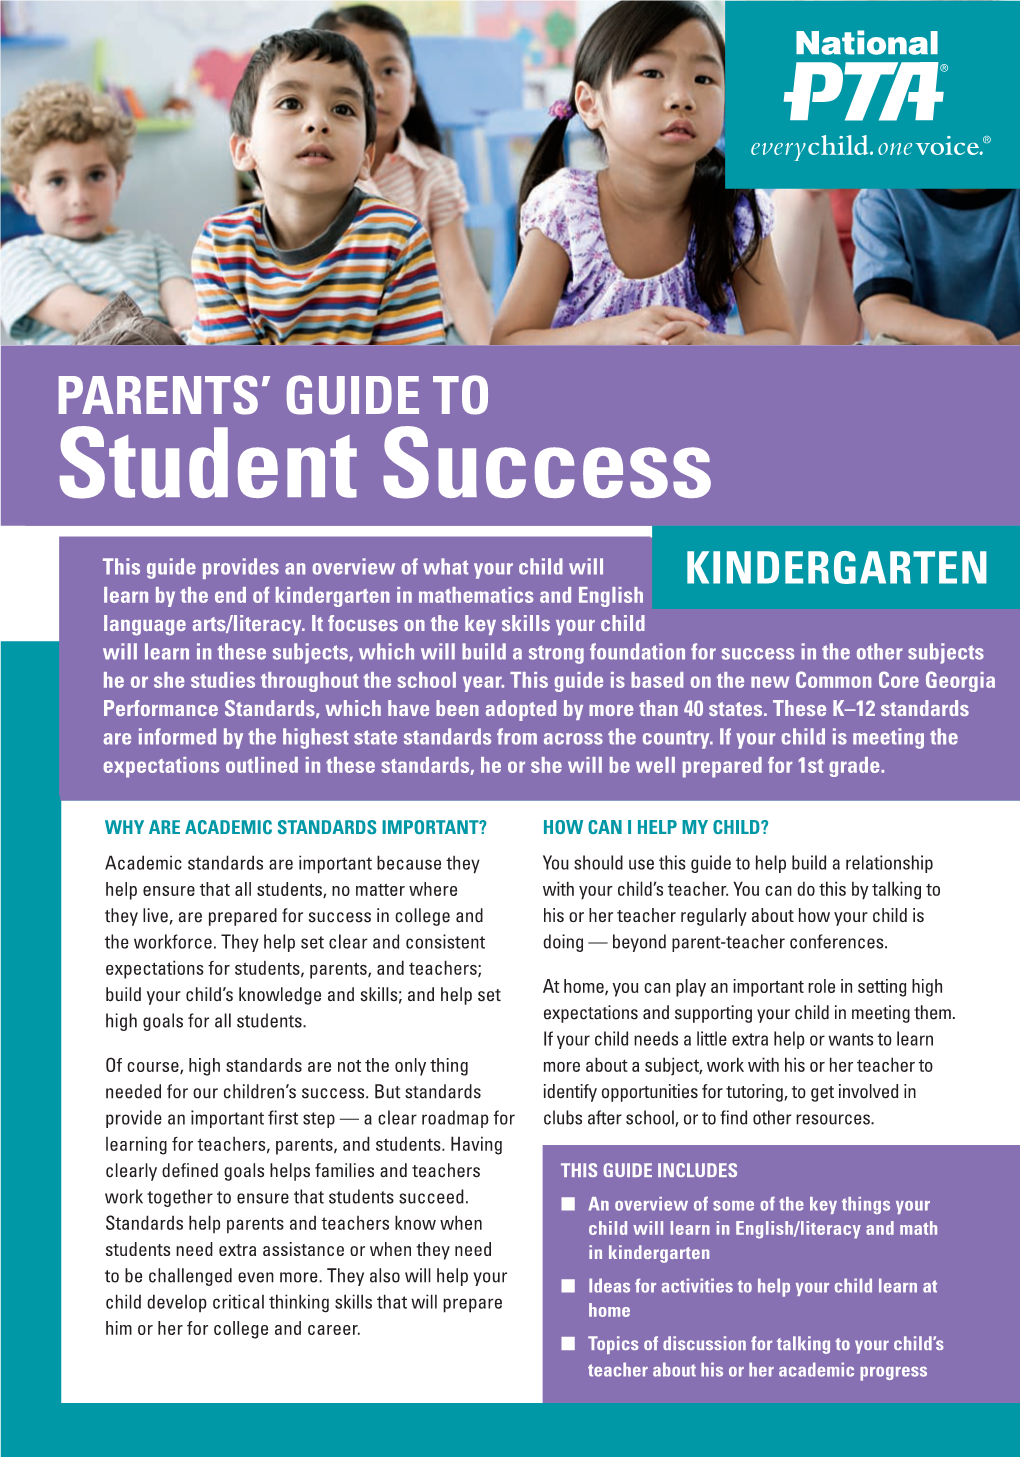 Parent's Guide to Student Success